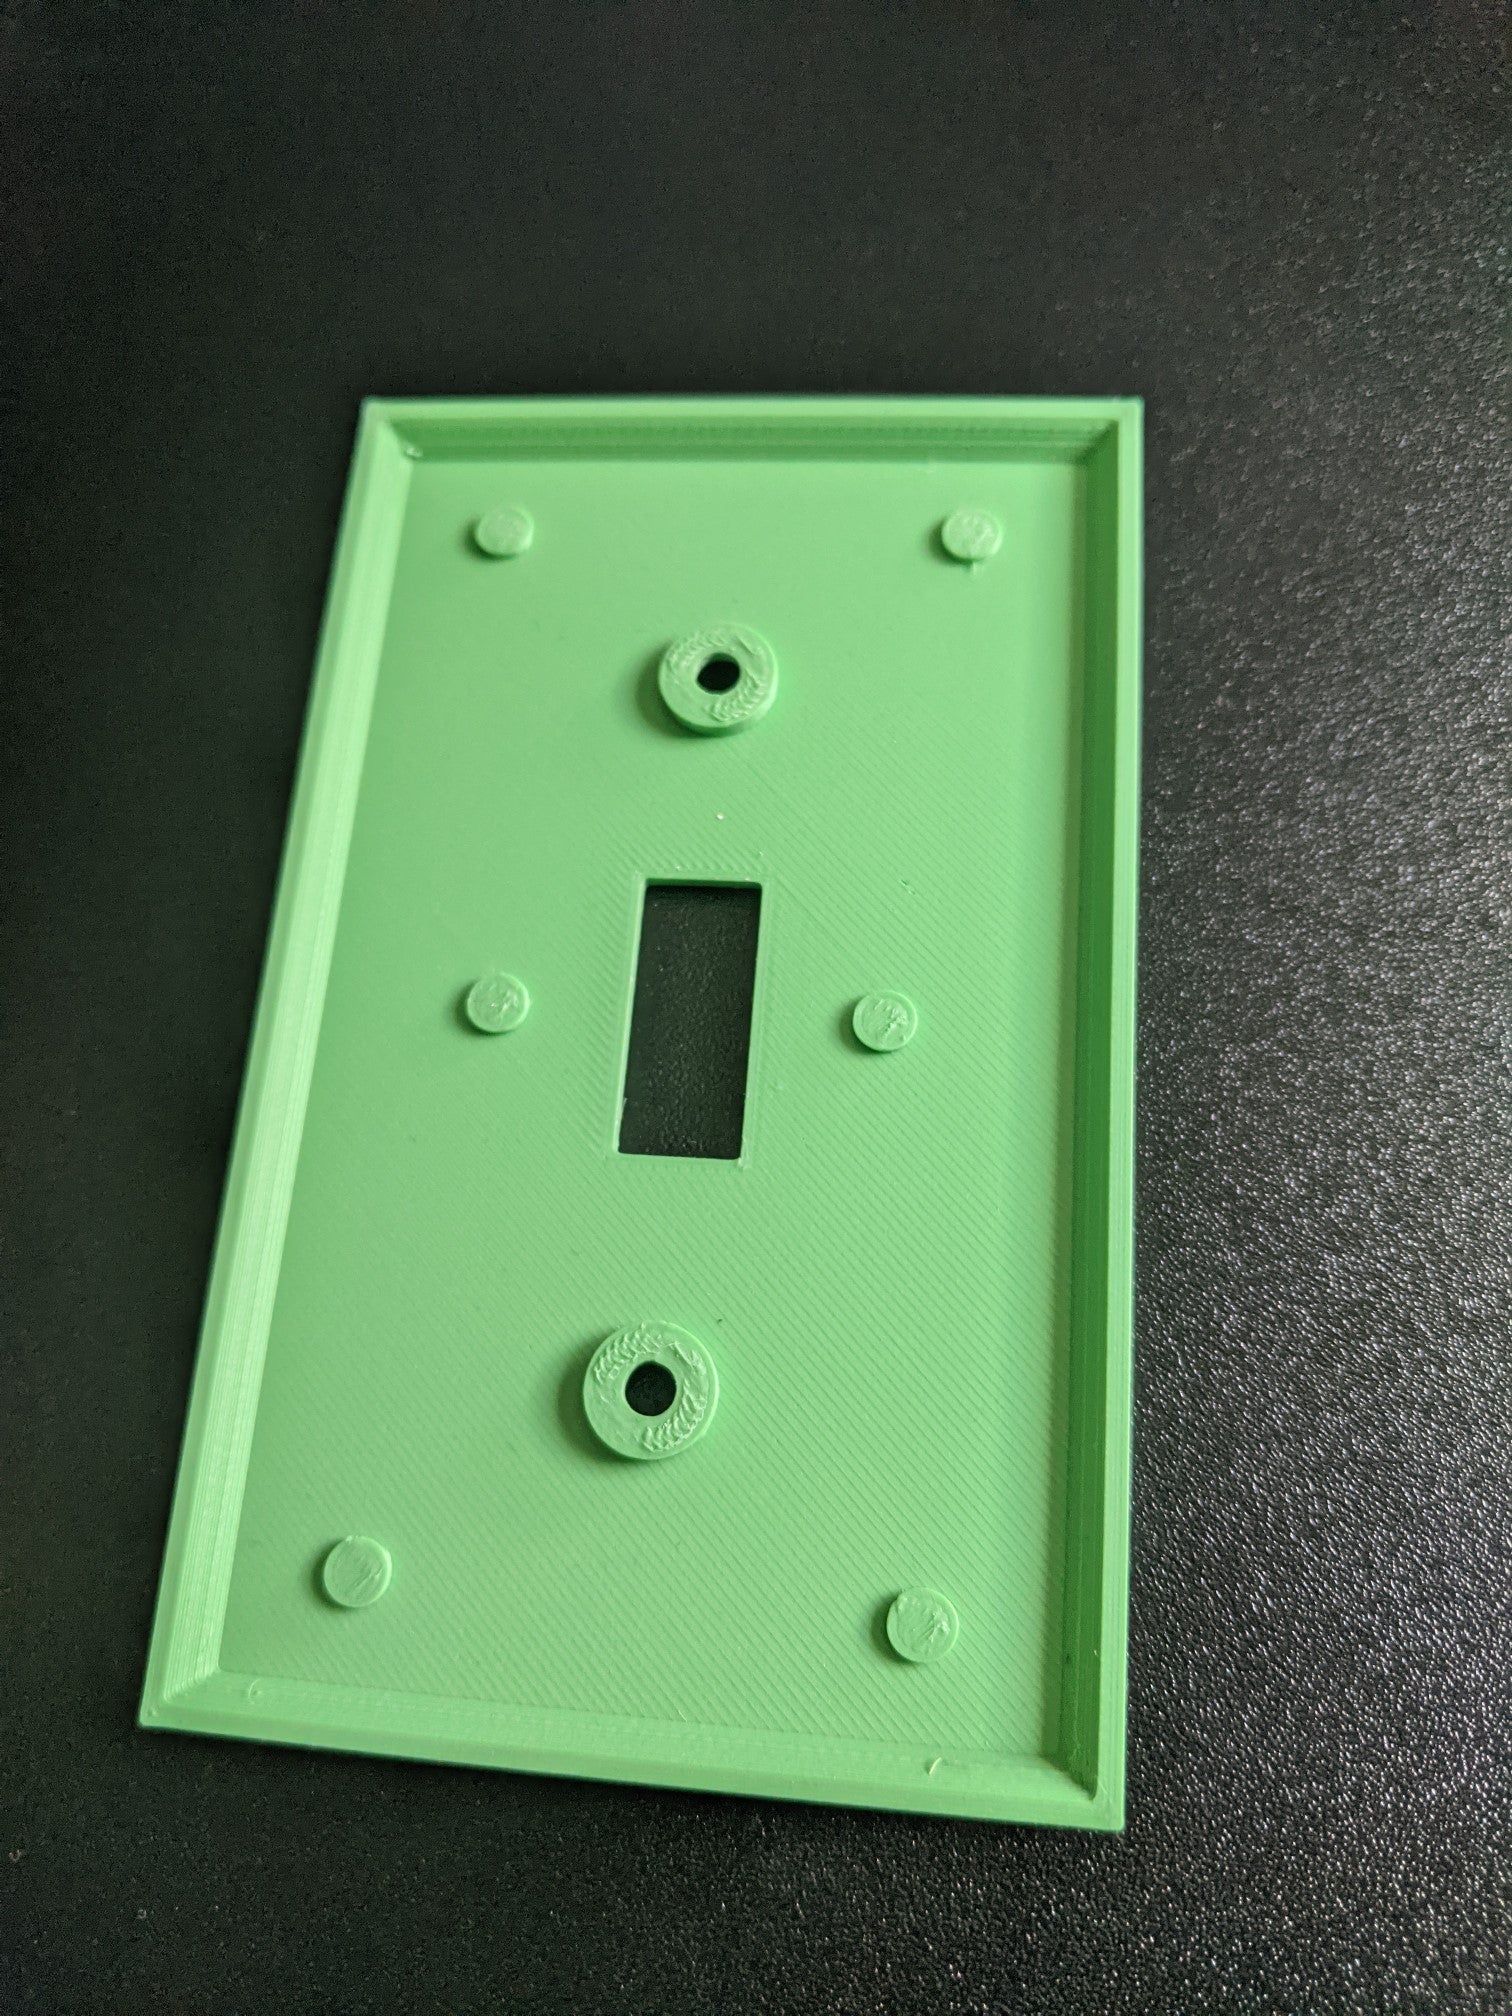 Light switch cover